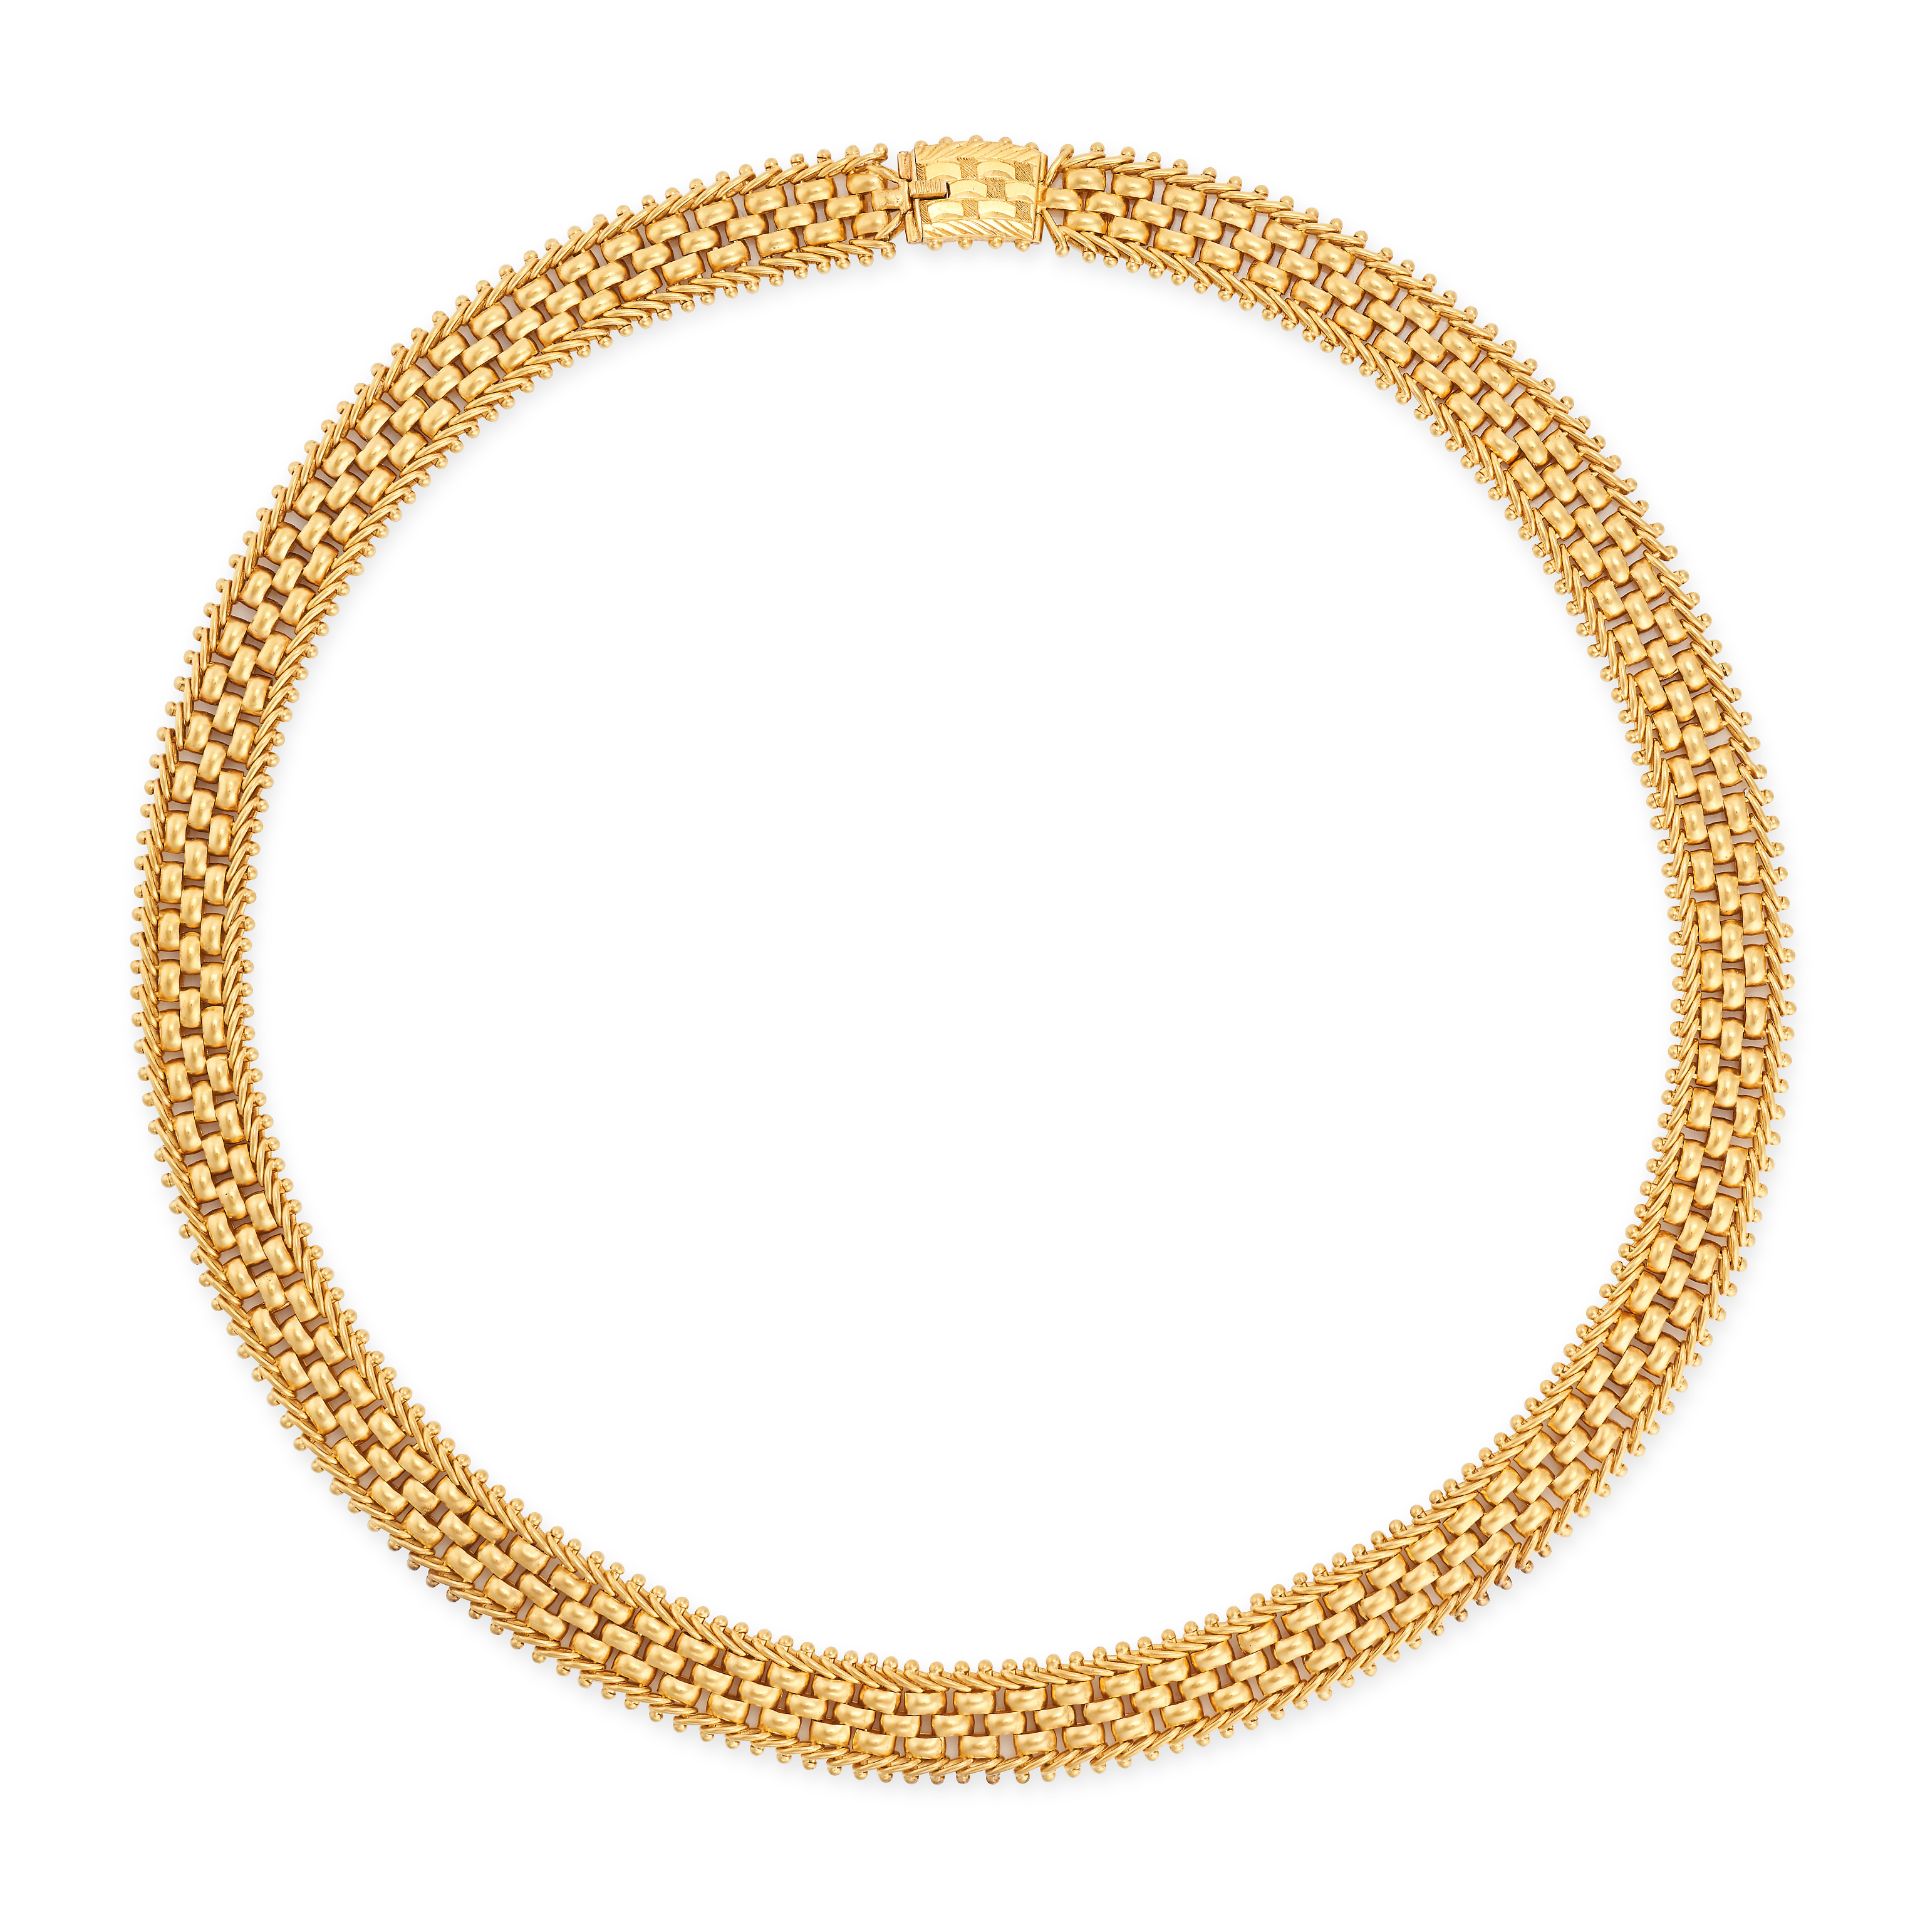 A GOLD CHAIN NECKLACE in yellow gold, comprising a row of brick links, no assay marks, 46.0cm, 46...